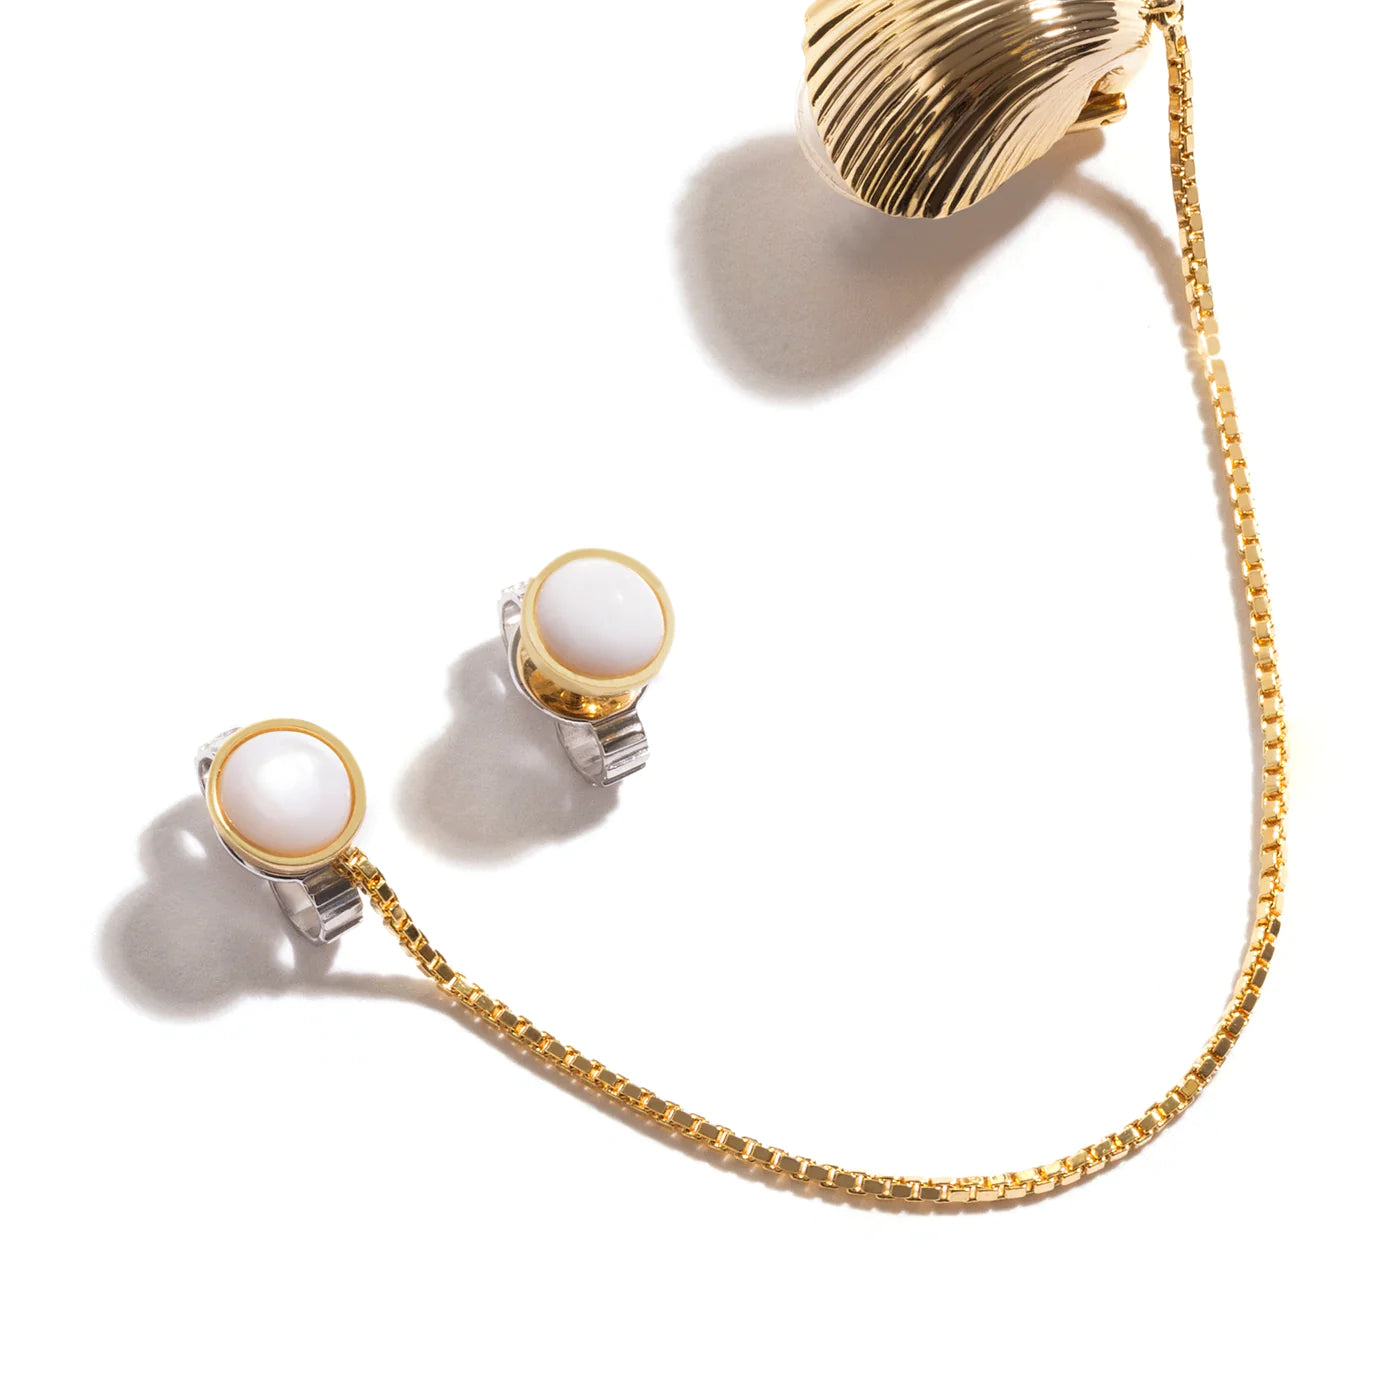 PERLA CHAIN EARRING IN 18K YELLOW GOLD WITH MOTHER OF PEARL